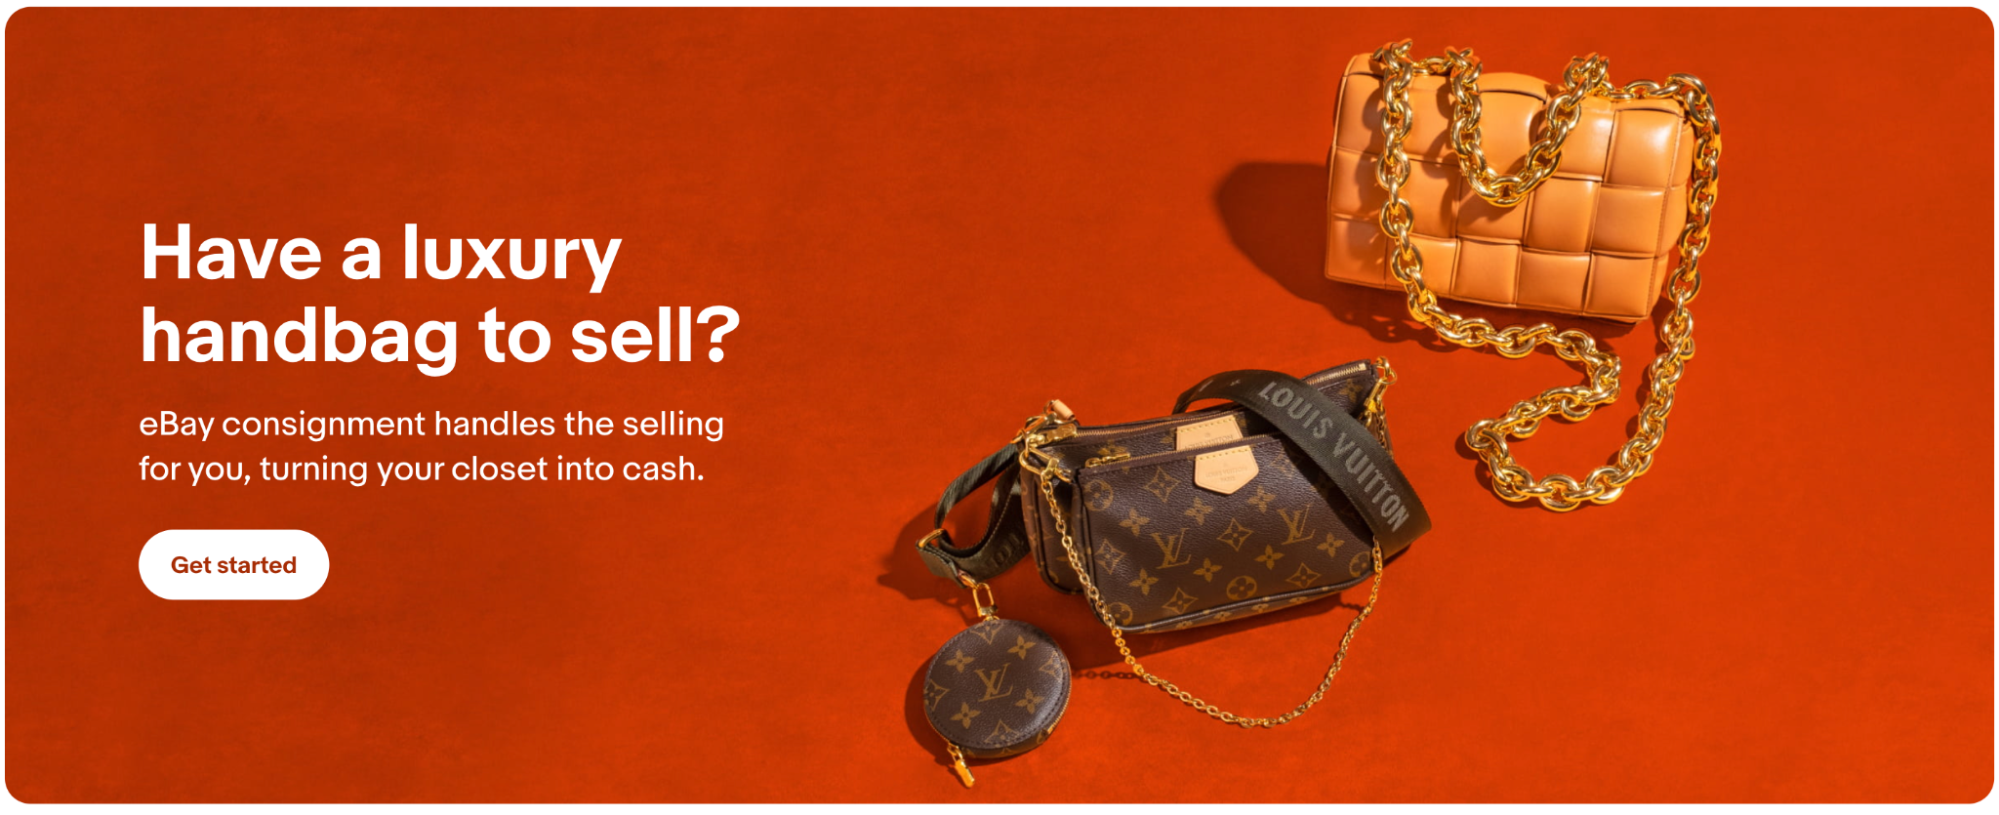 Banner image for eBay consignment with images of luxury handbags as examples of consignee products.